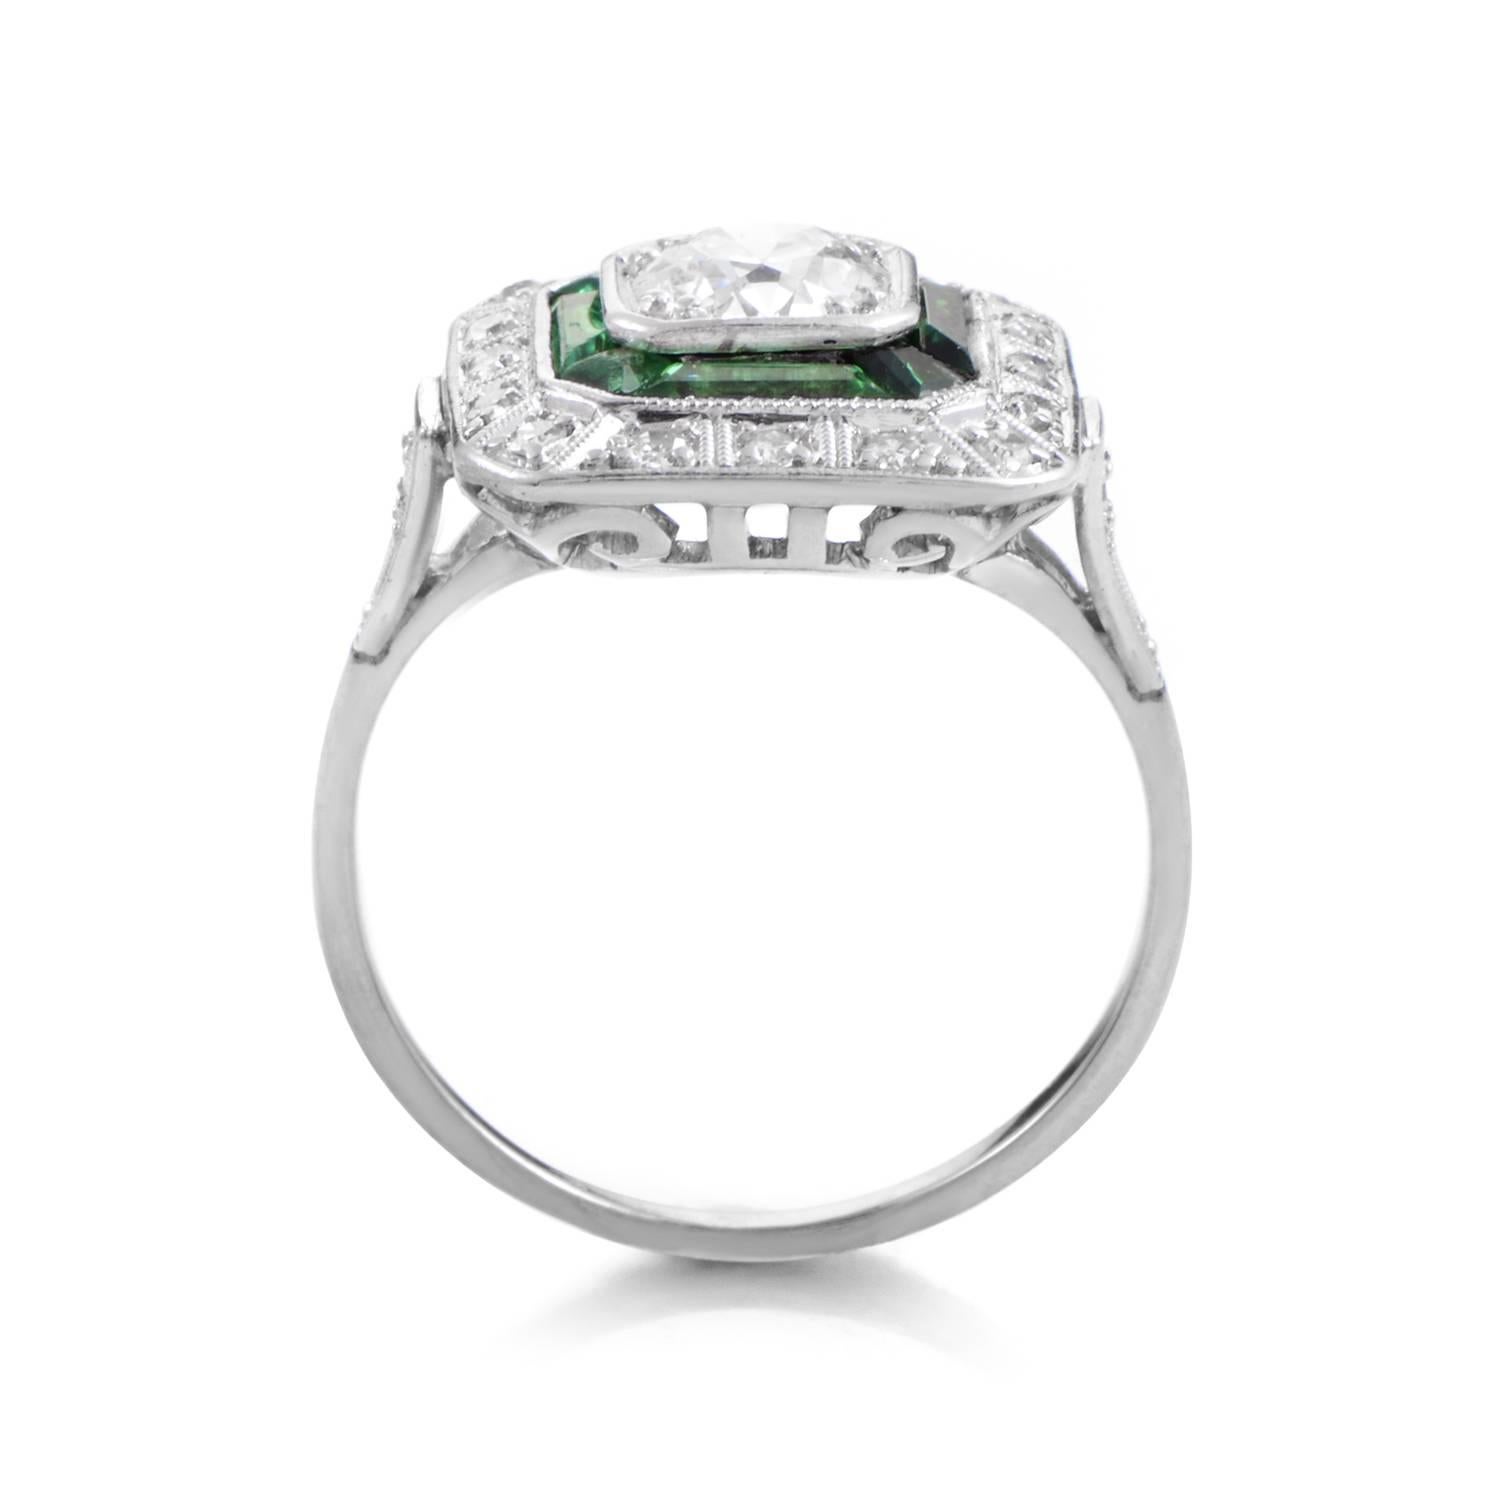 This finely crafted Art Deco style ring boasts a beauty that is hard to come across nowadays. The ring is made of 18K white gold and features a square-shaped bezel set with .20ct of diamonds. The bezel is also set with rich, green emeralds- all of